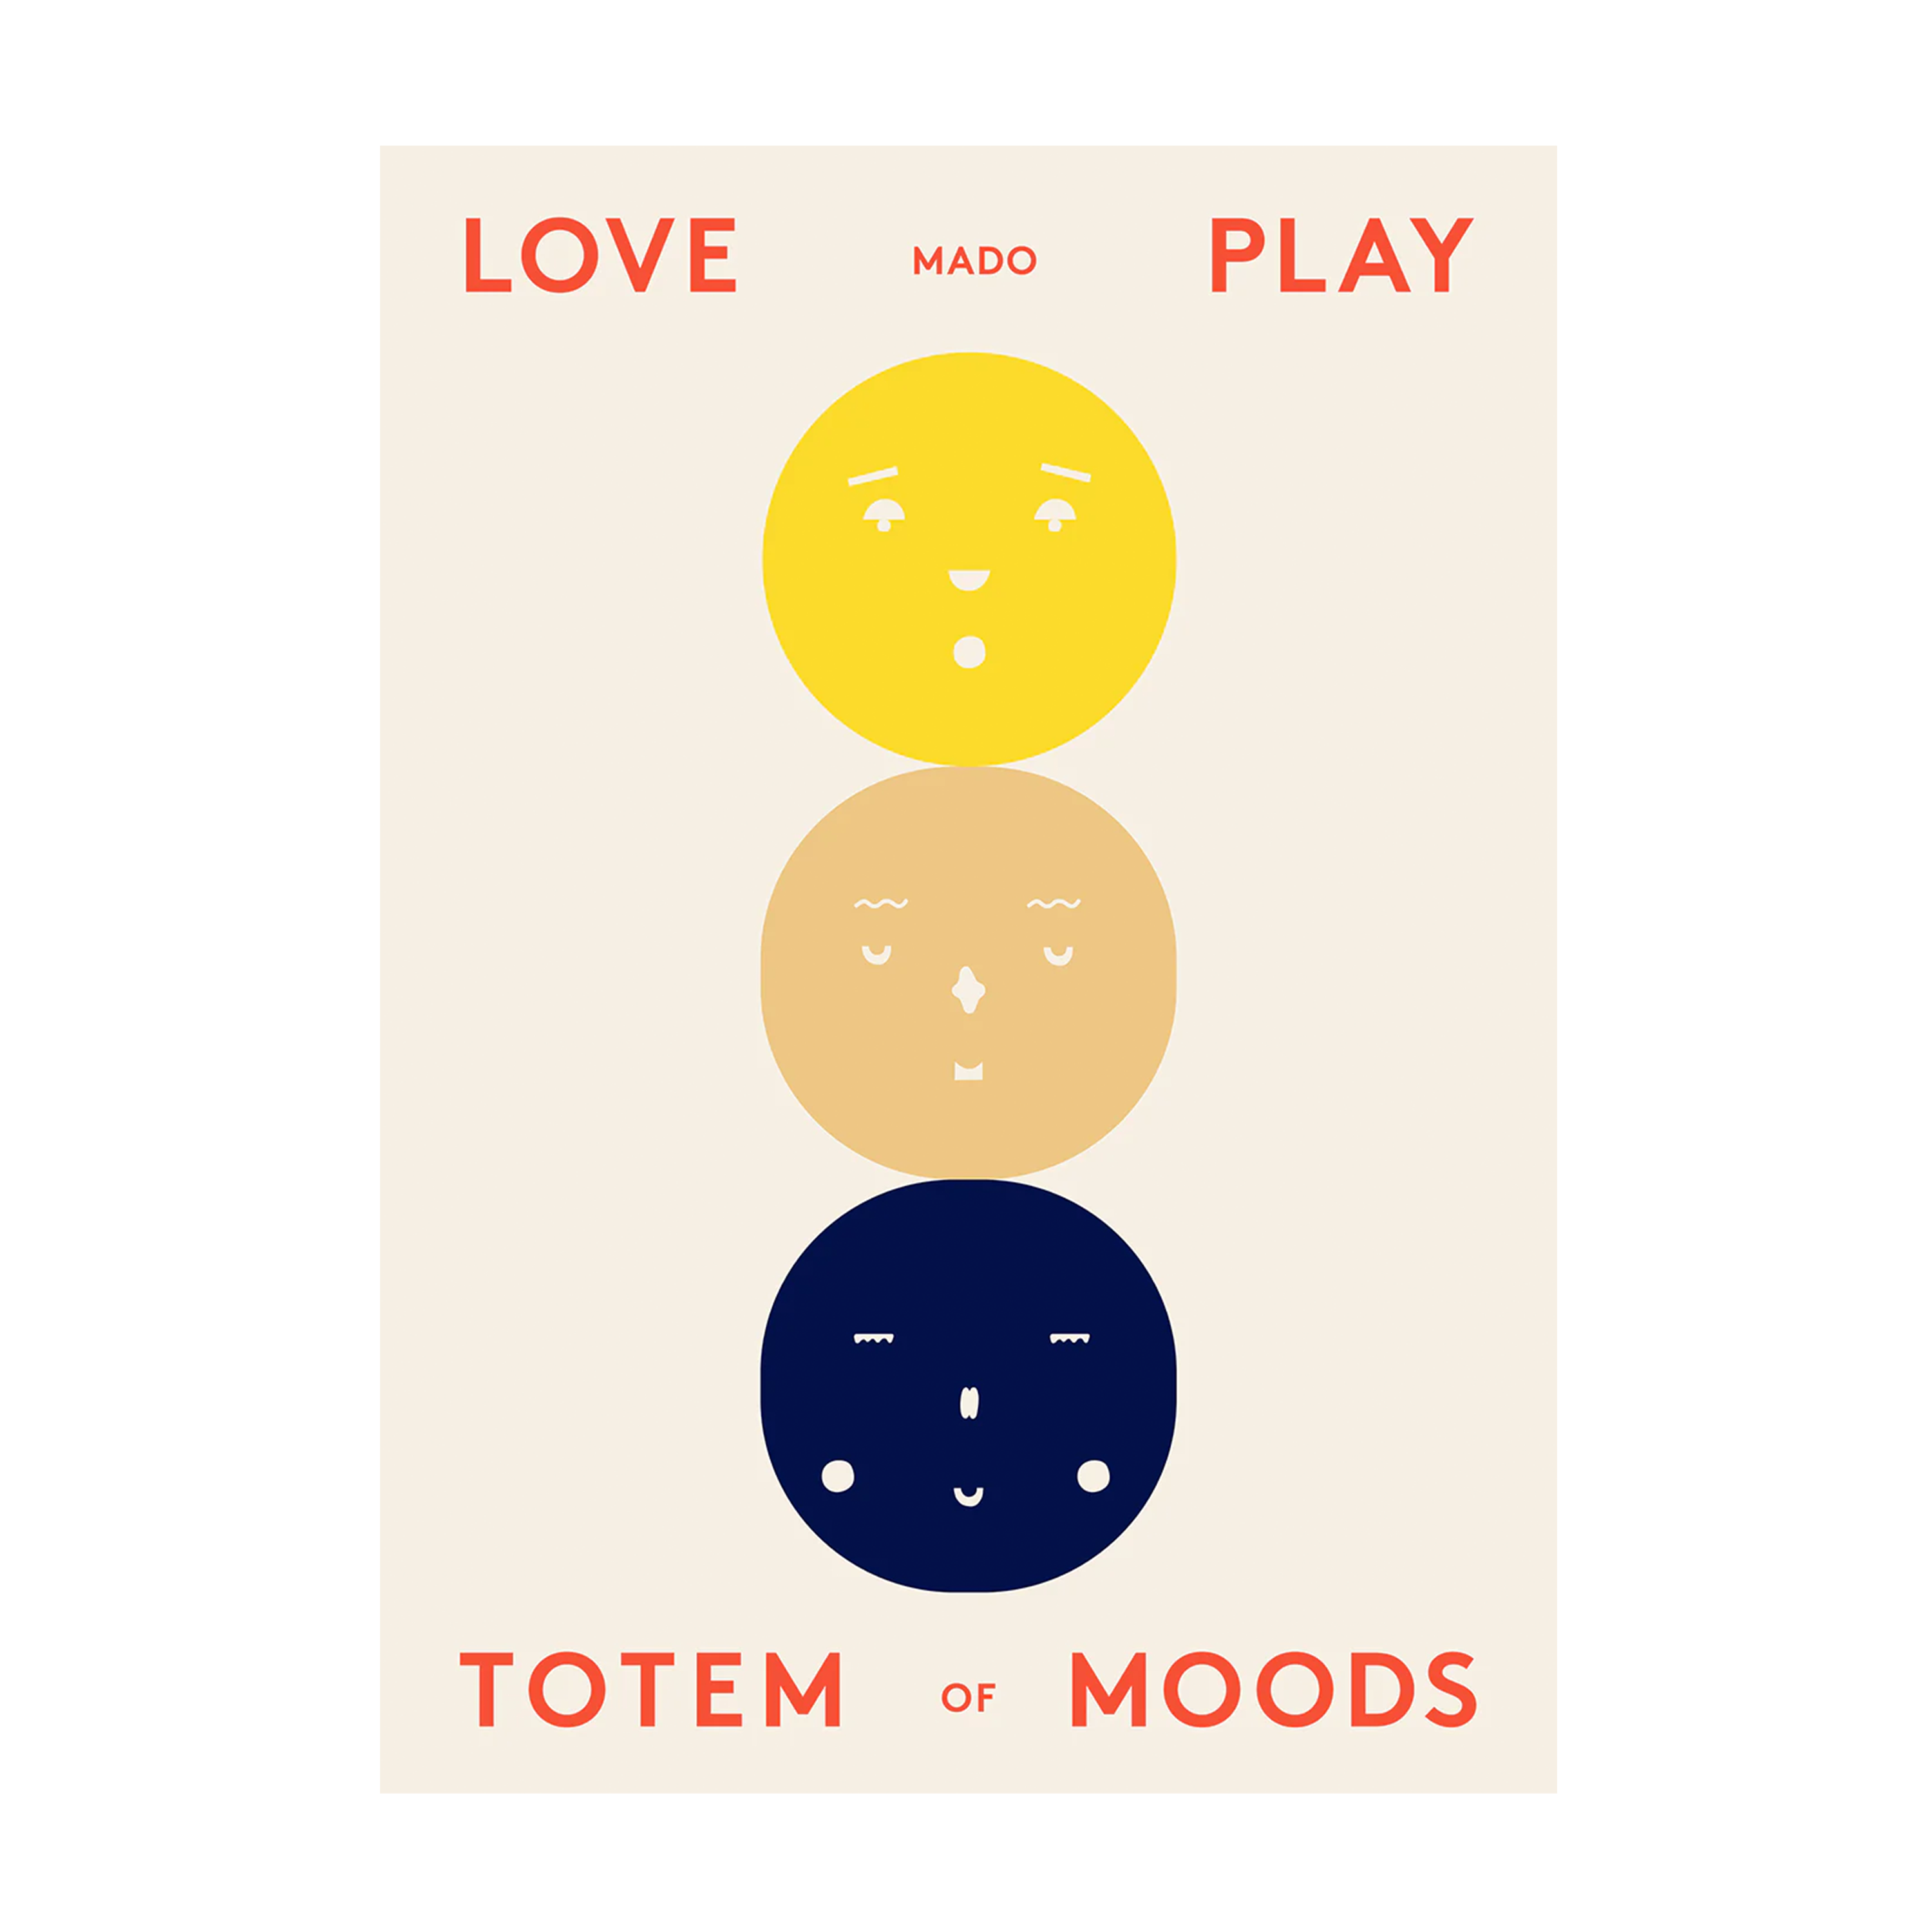 Totem of moods